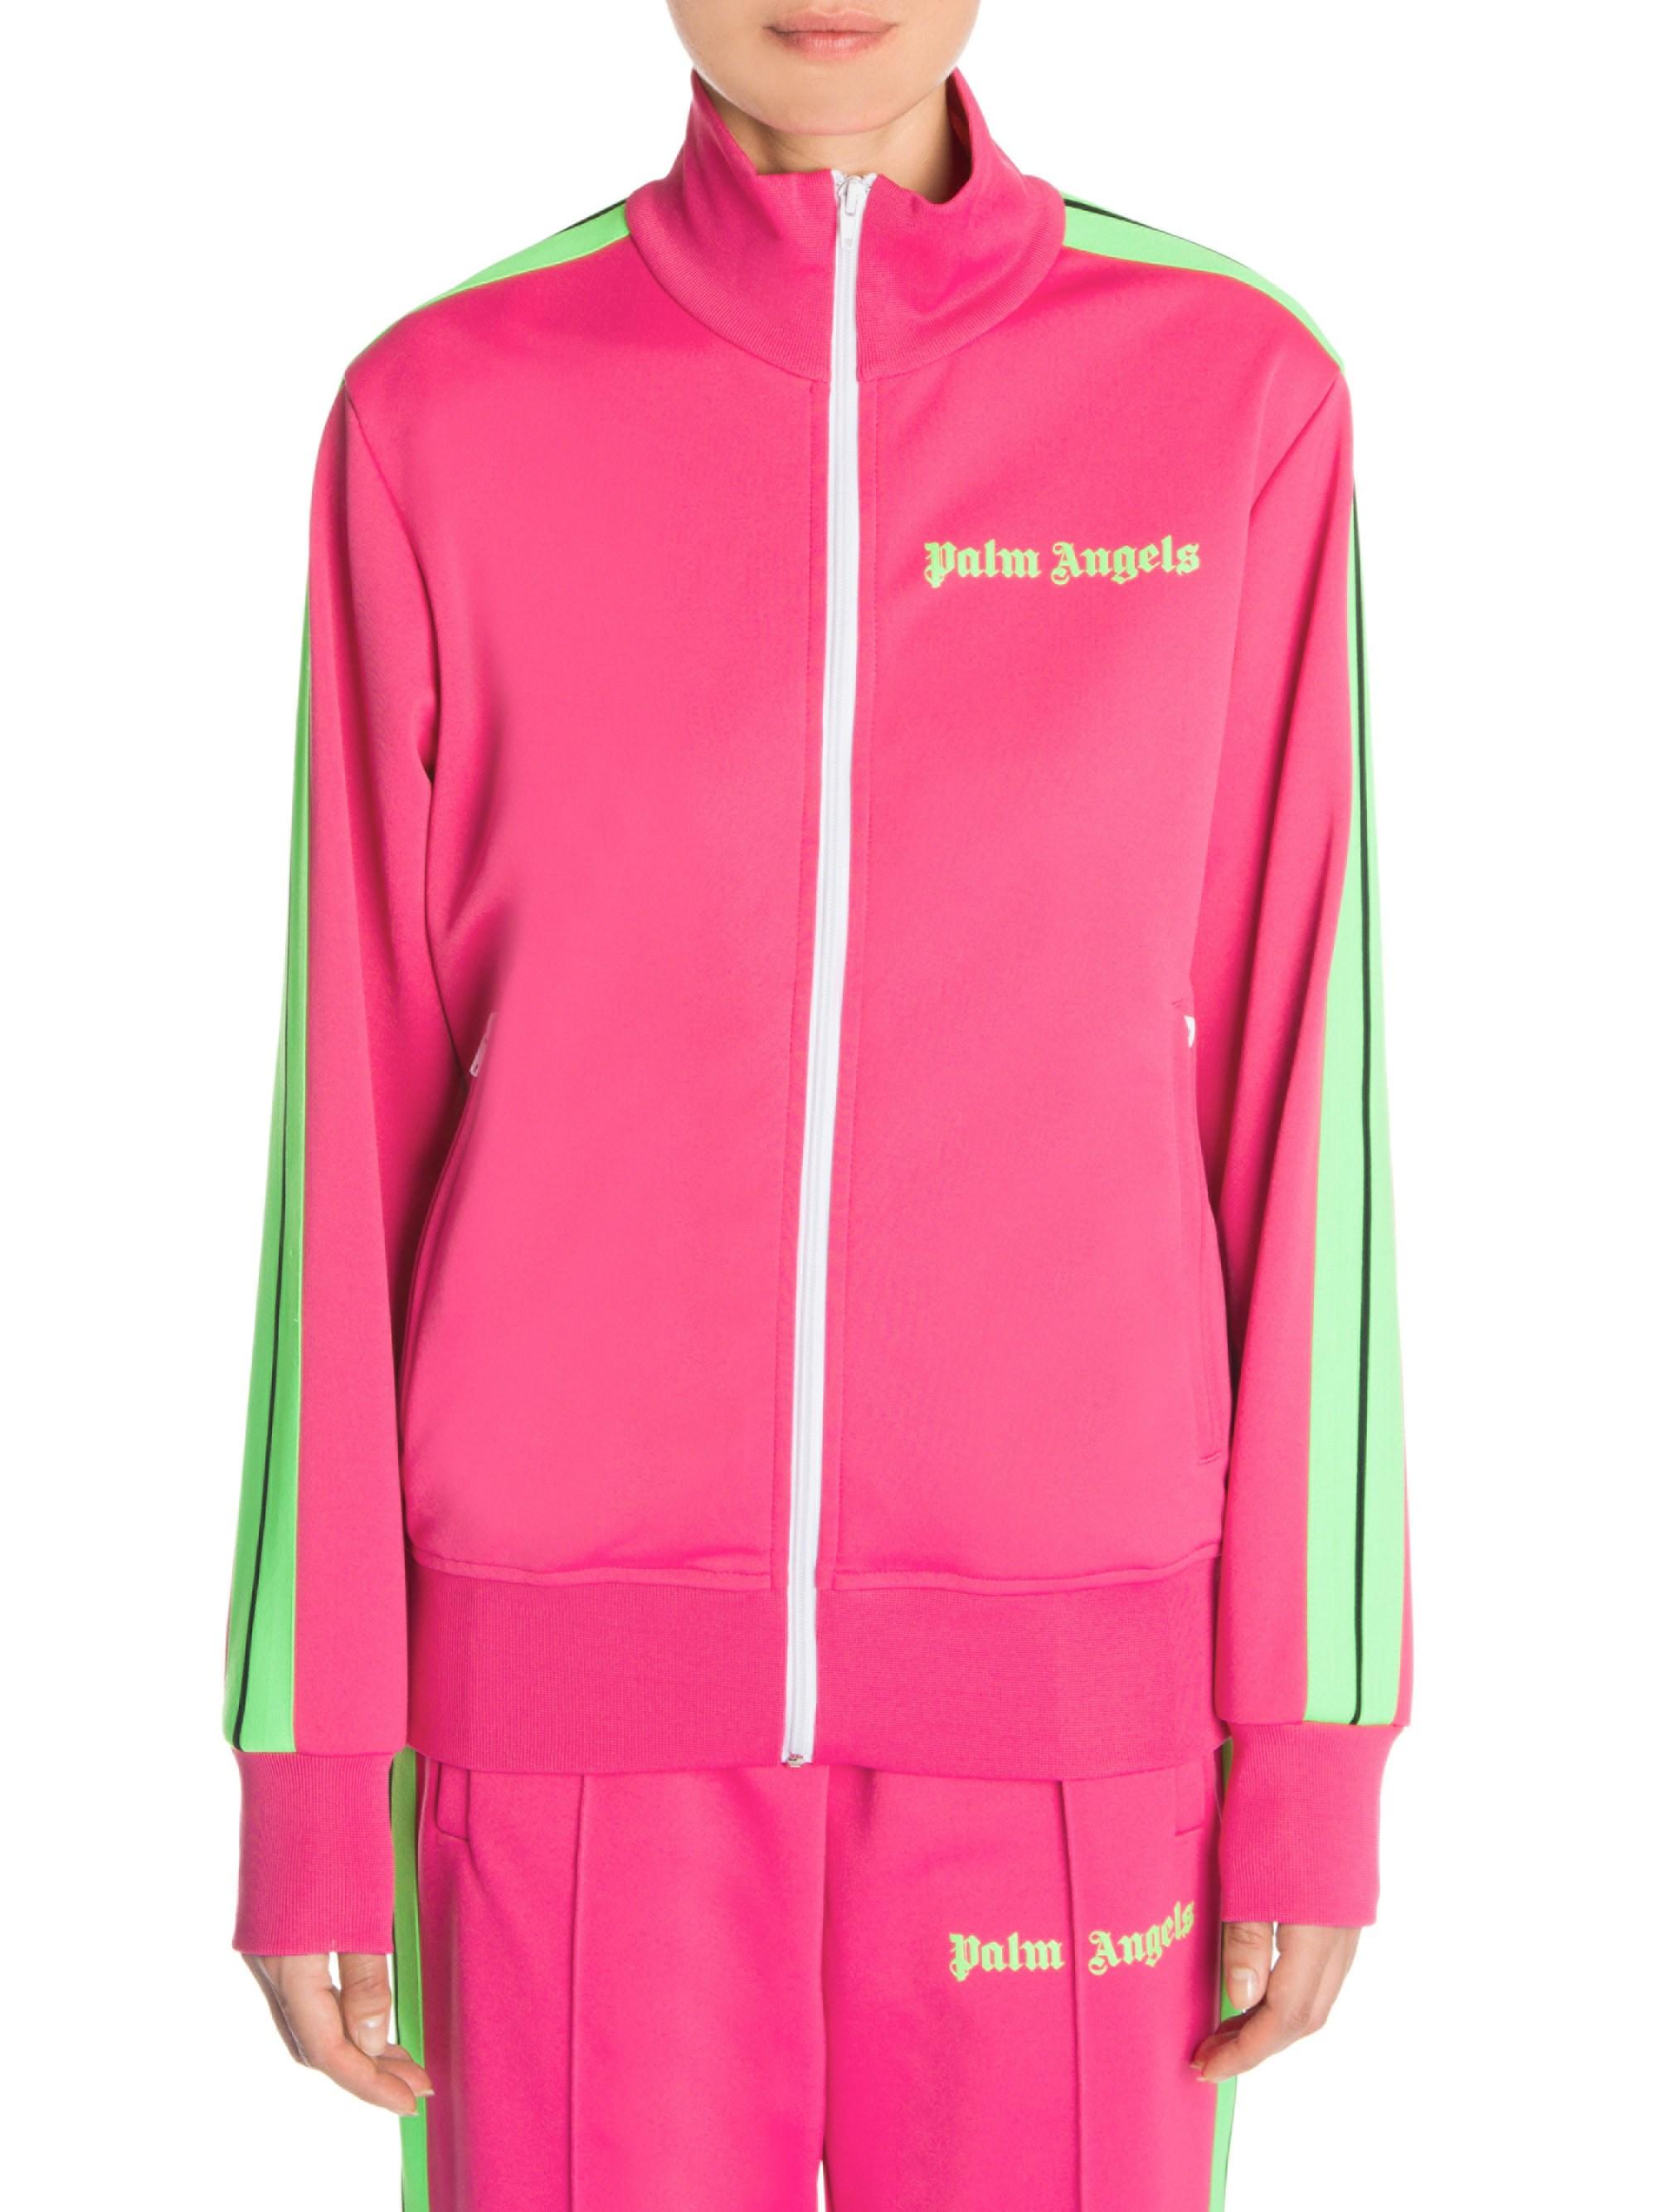 Green Palm Angels Tracksuit Top Sellers, 62% OFF | www 